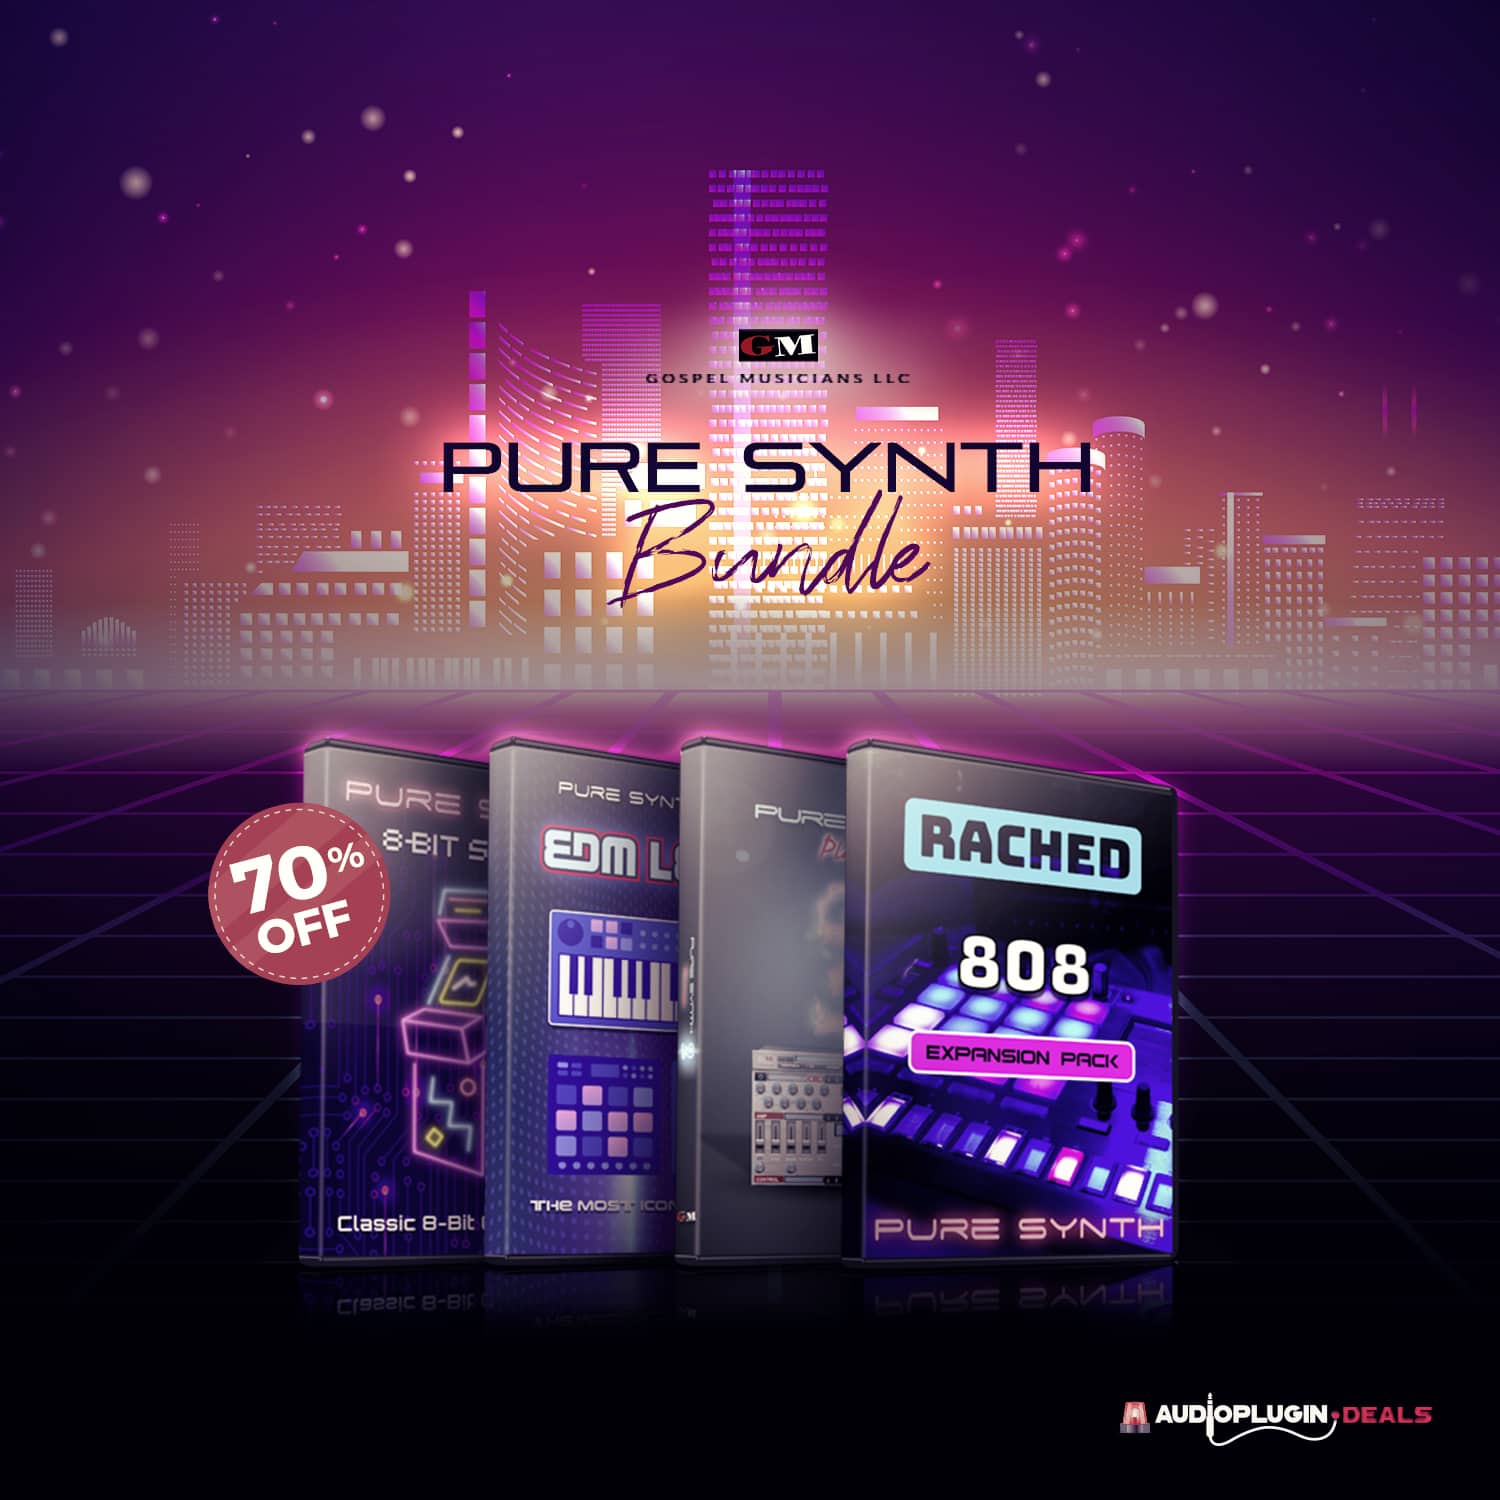 Pure Synth Bundle by Gospel Musicians